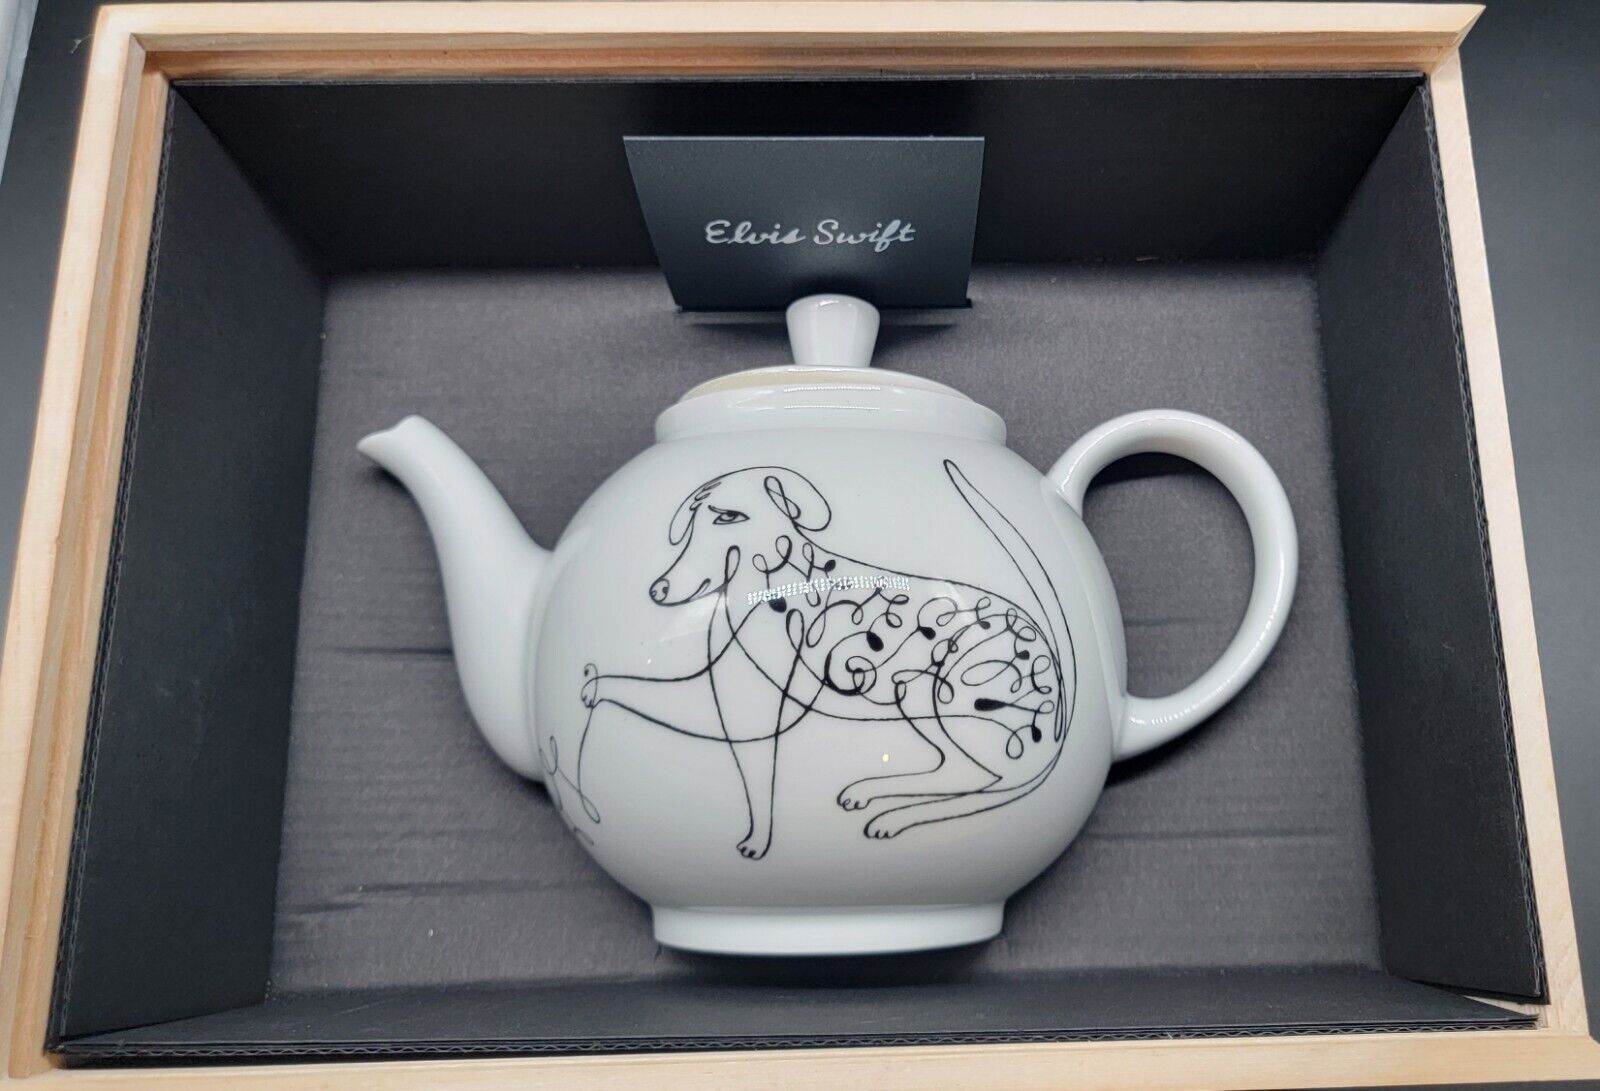 RARE Limited Edition ELVIS SWIFT-Teapot #7 of 200- 50th Anniversary Crate&Barrel